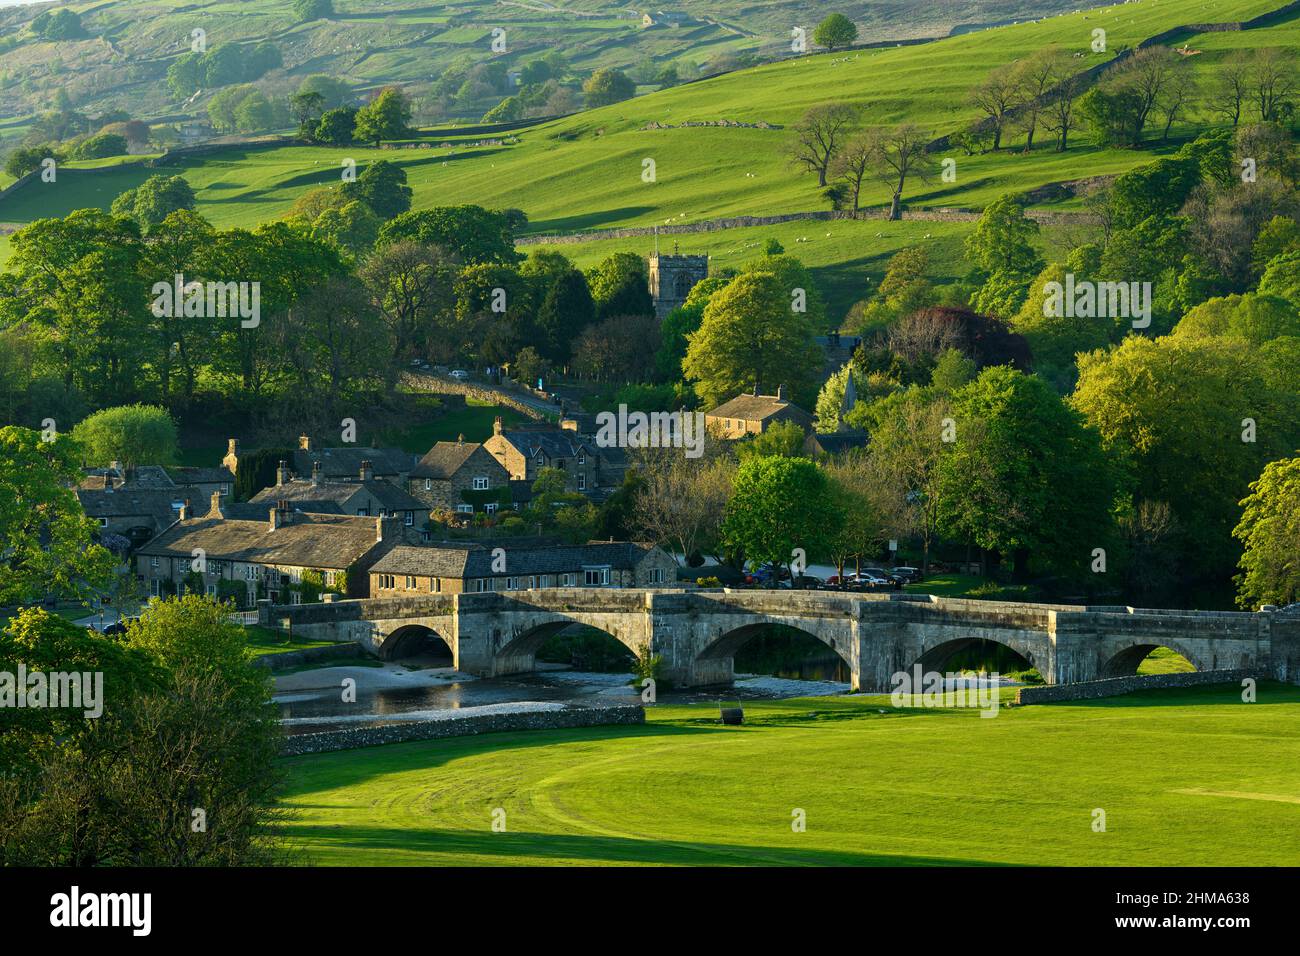 Scenic sunny Burnsall nestling in valley (5-arched bridge, attractive cottages, church tower, green hillside fields) - Yorkshire Dales, England, UK. Stock Photo